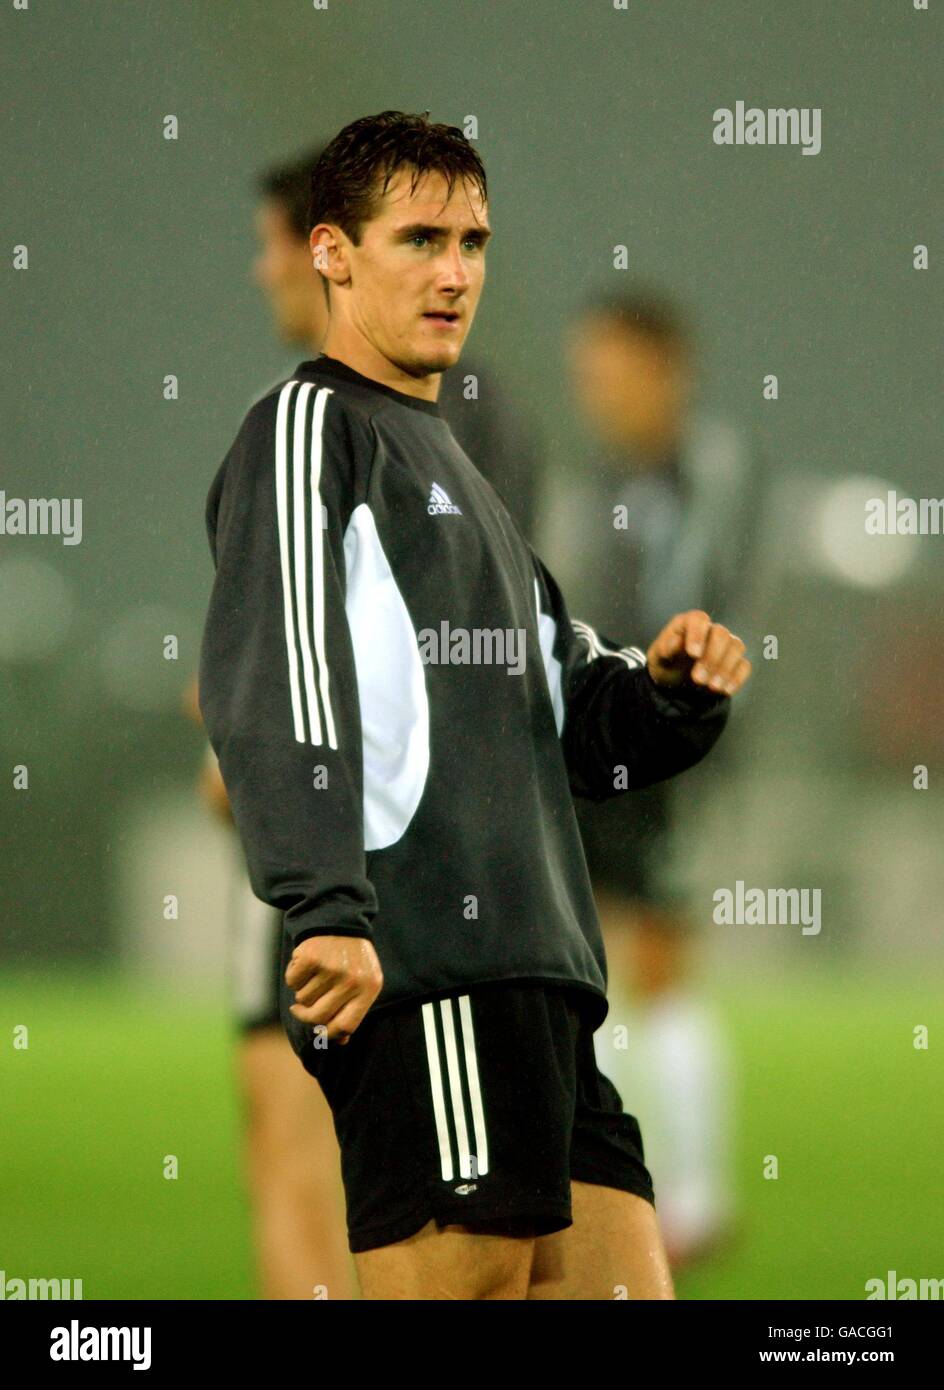 Soccer - FIFA World Cup 2002 - Final - Brazil v Germany - Training. Miroslav Klose of Germany training prior to the World Cup Final in Japan Stock Photo